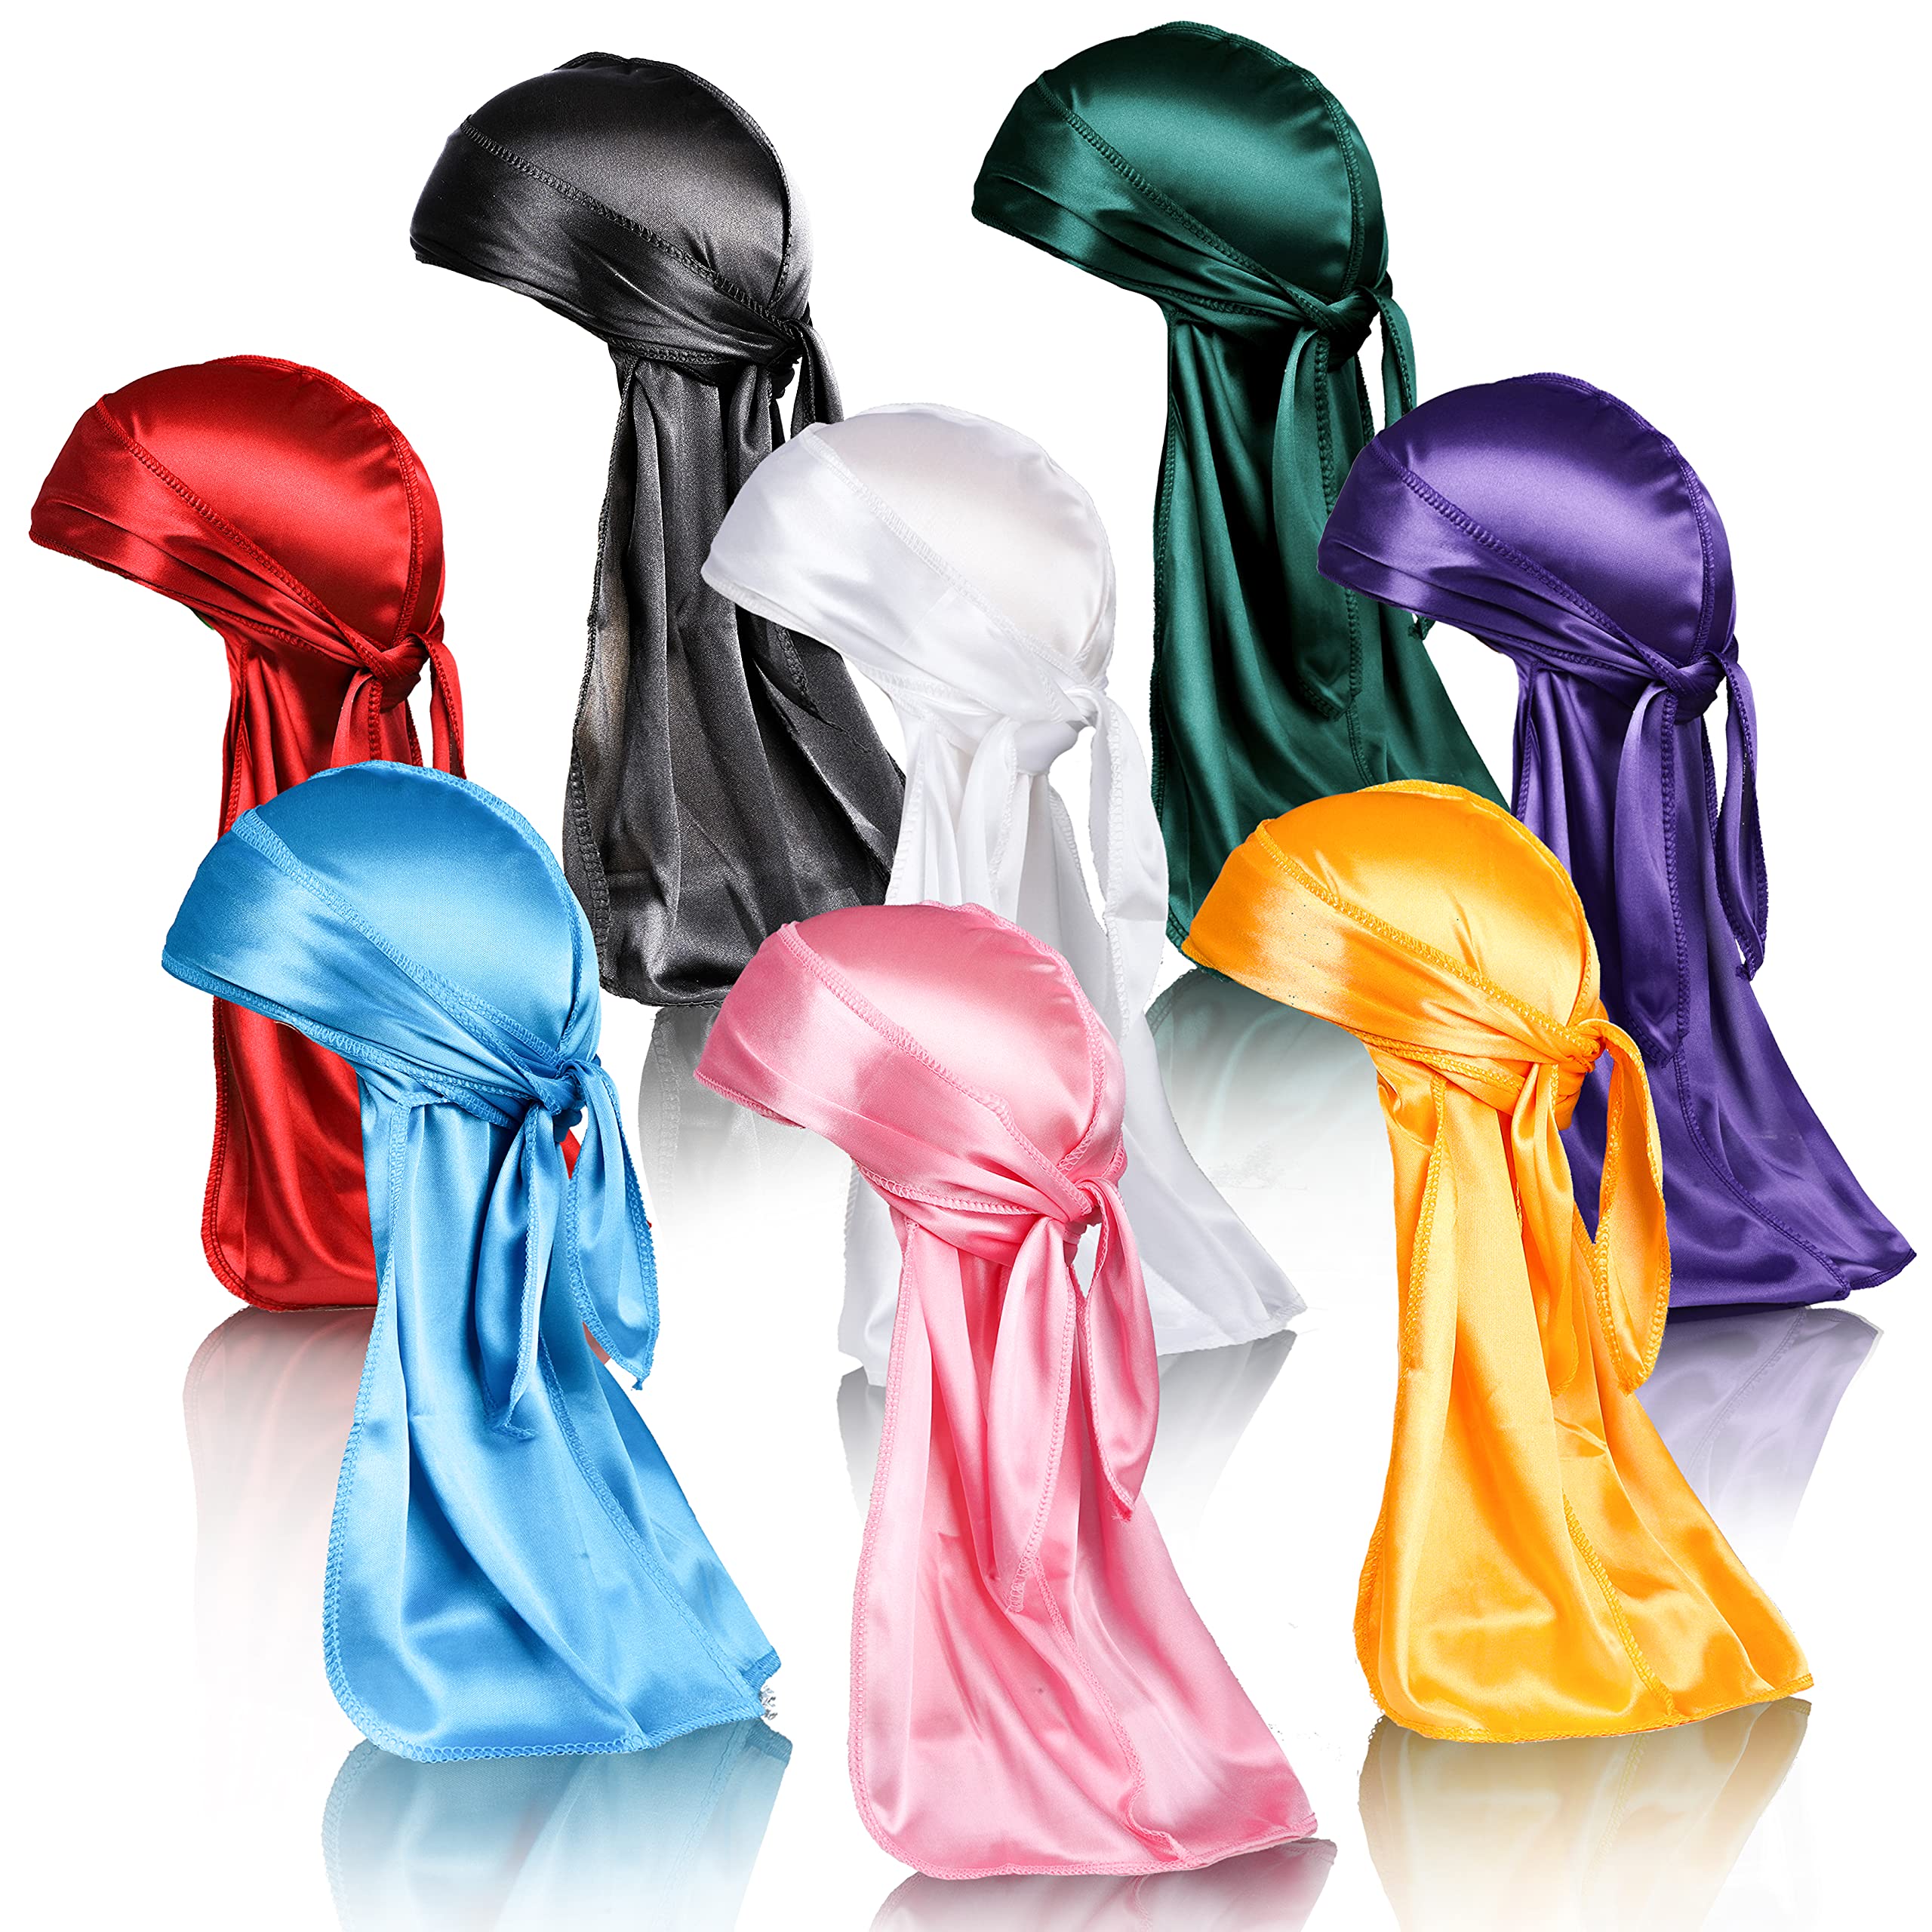  4PCS Silky Durags, Silk Durag for Men Women Waves, Silk Durag  Pack with 1 Wave Cap, Silky Satin Durag Extra Long Tails(Aqua, Light Coral,  Pale Yellow, Pale Lilac) : Beauty 